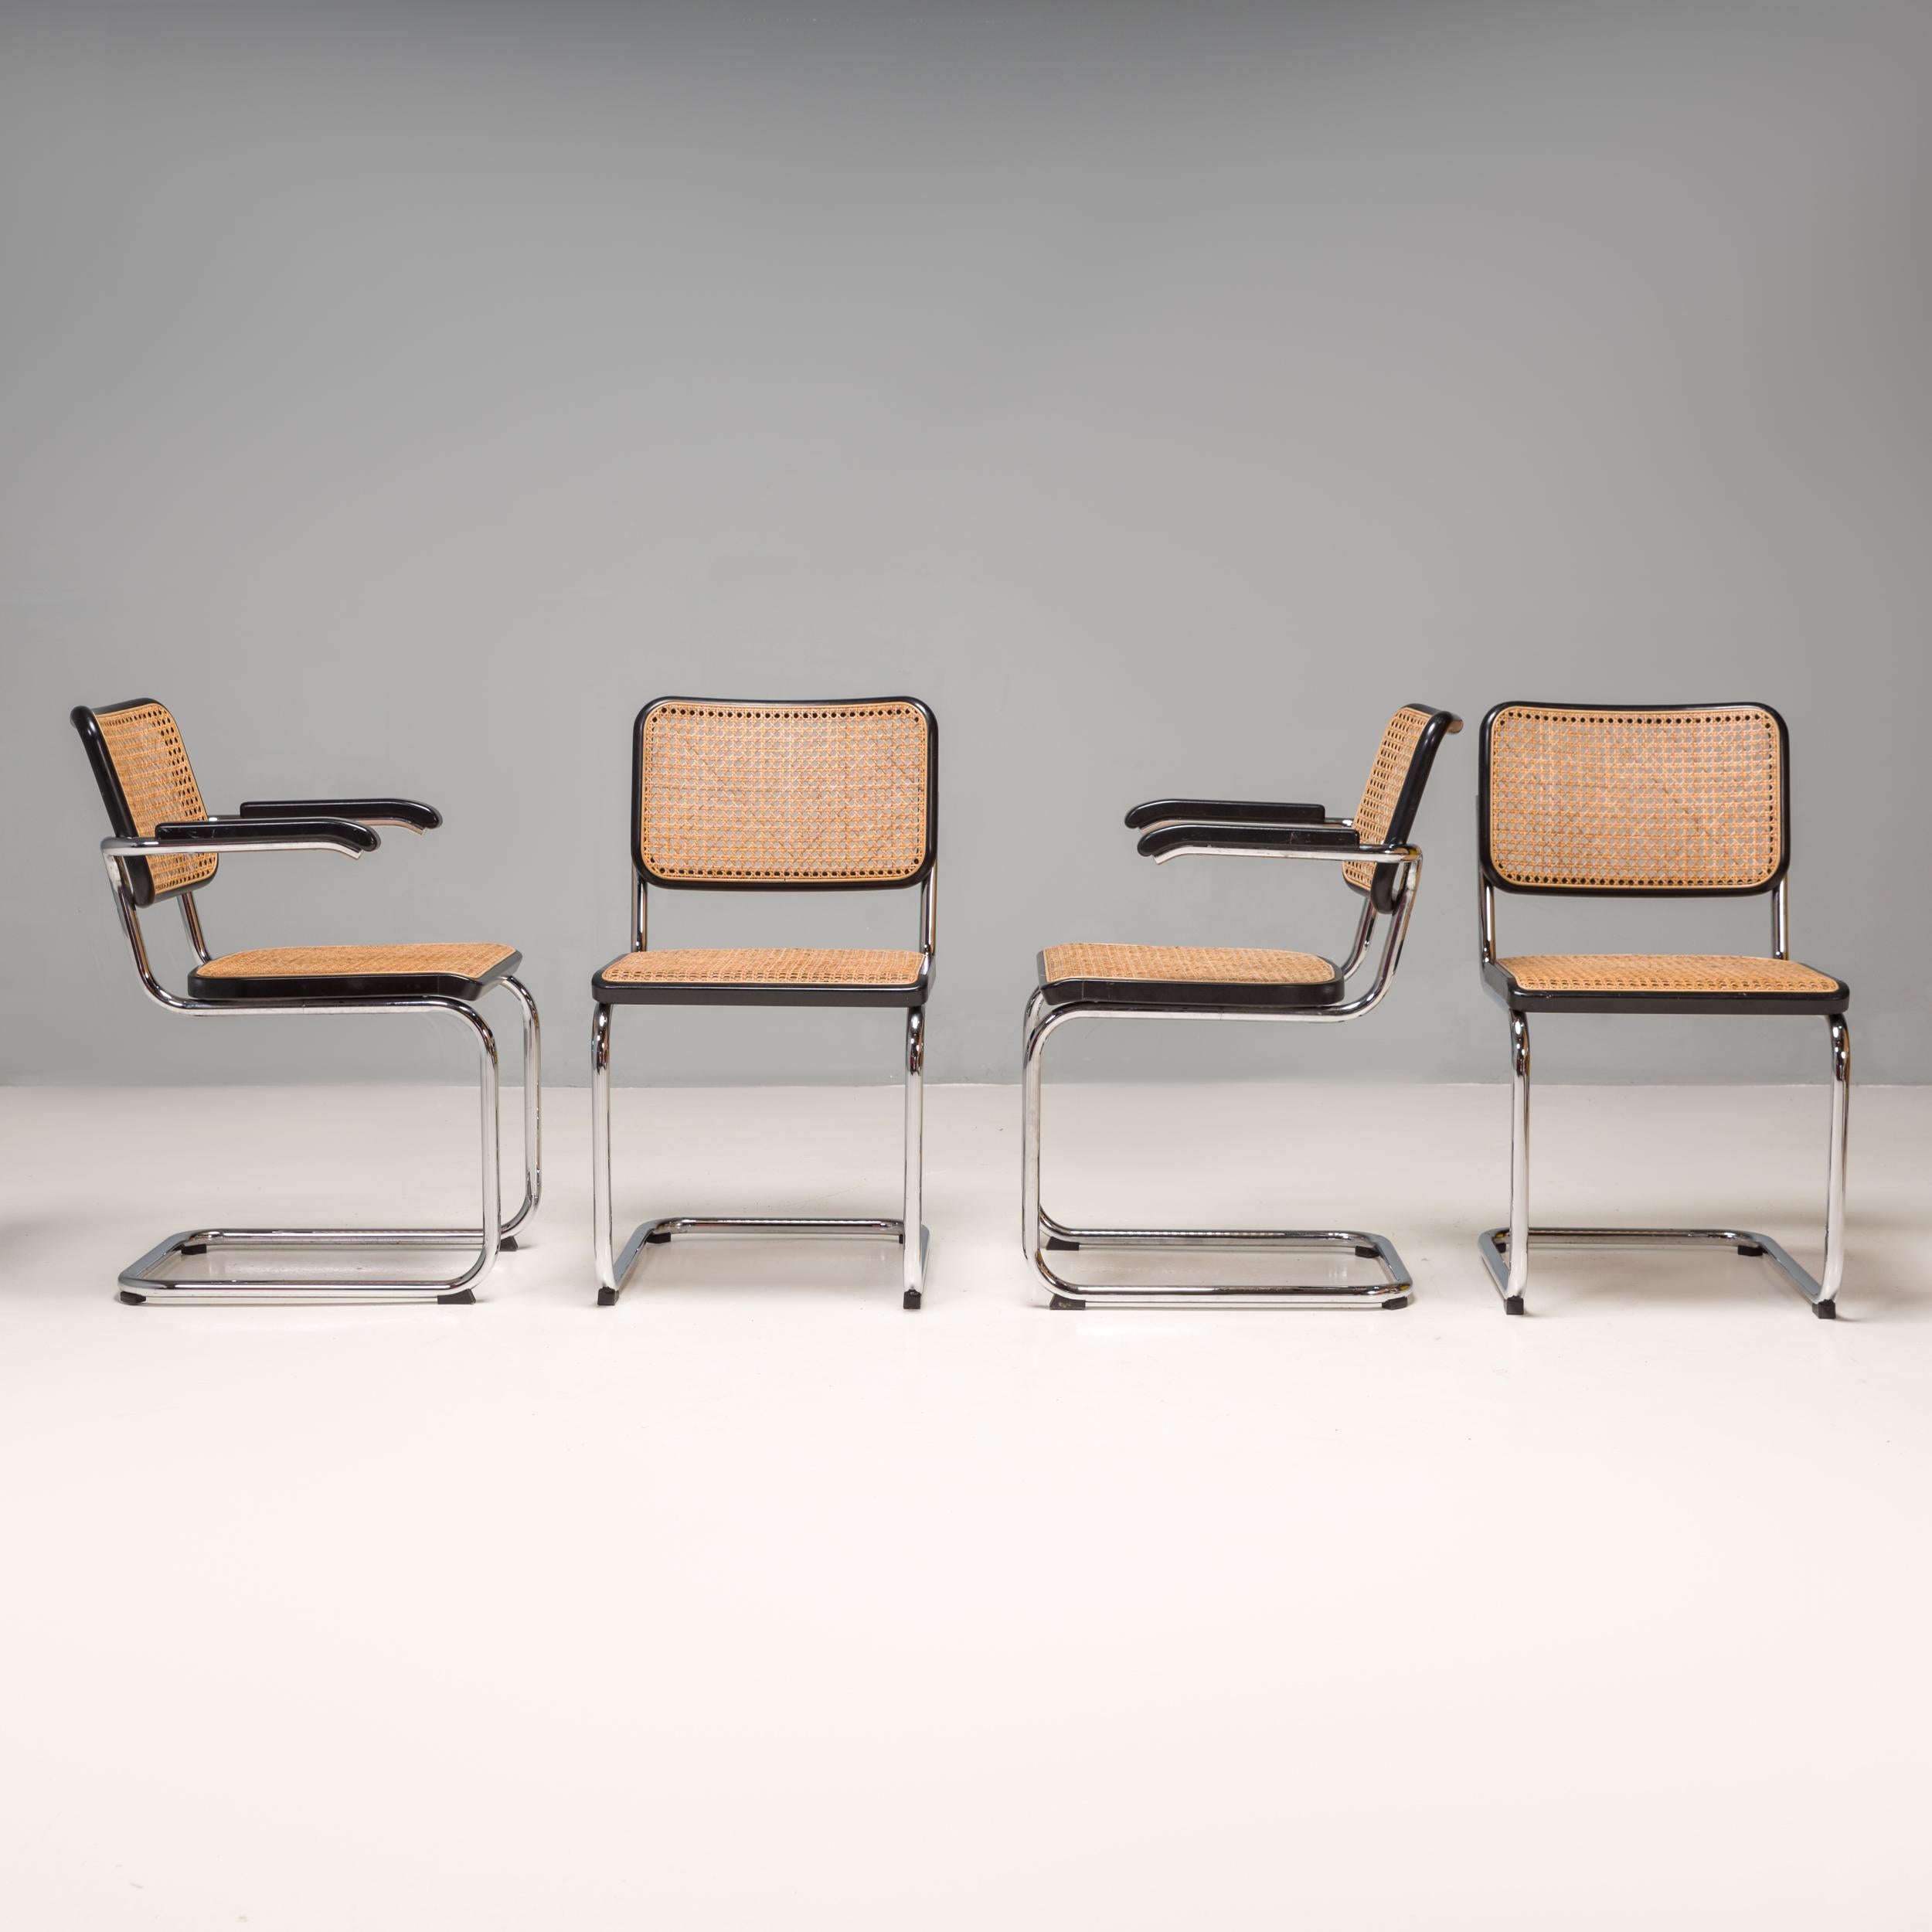 Bauhaus Marcel Breuer by Thonet S 32 & S 64 Cane Dining Chairs, Set of 4